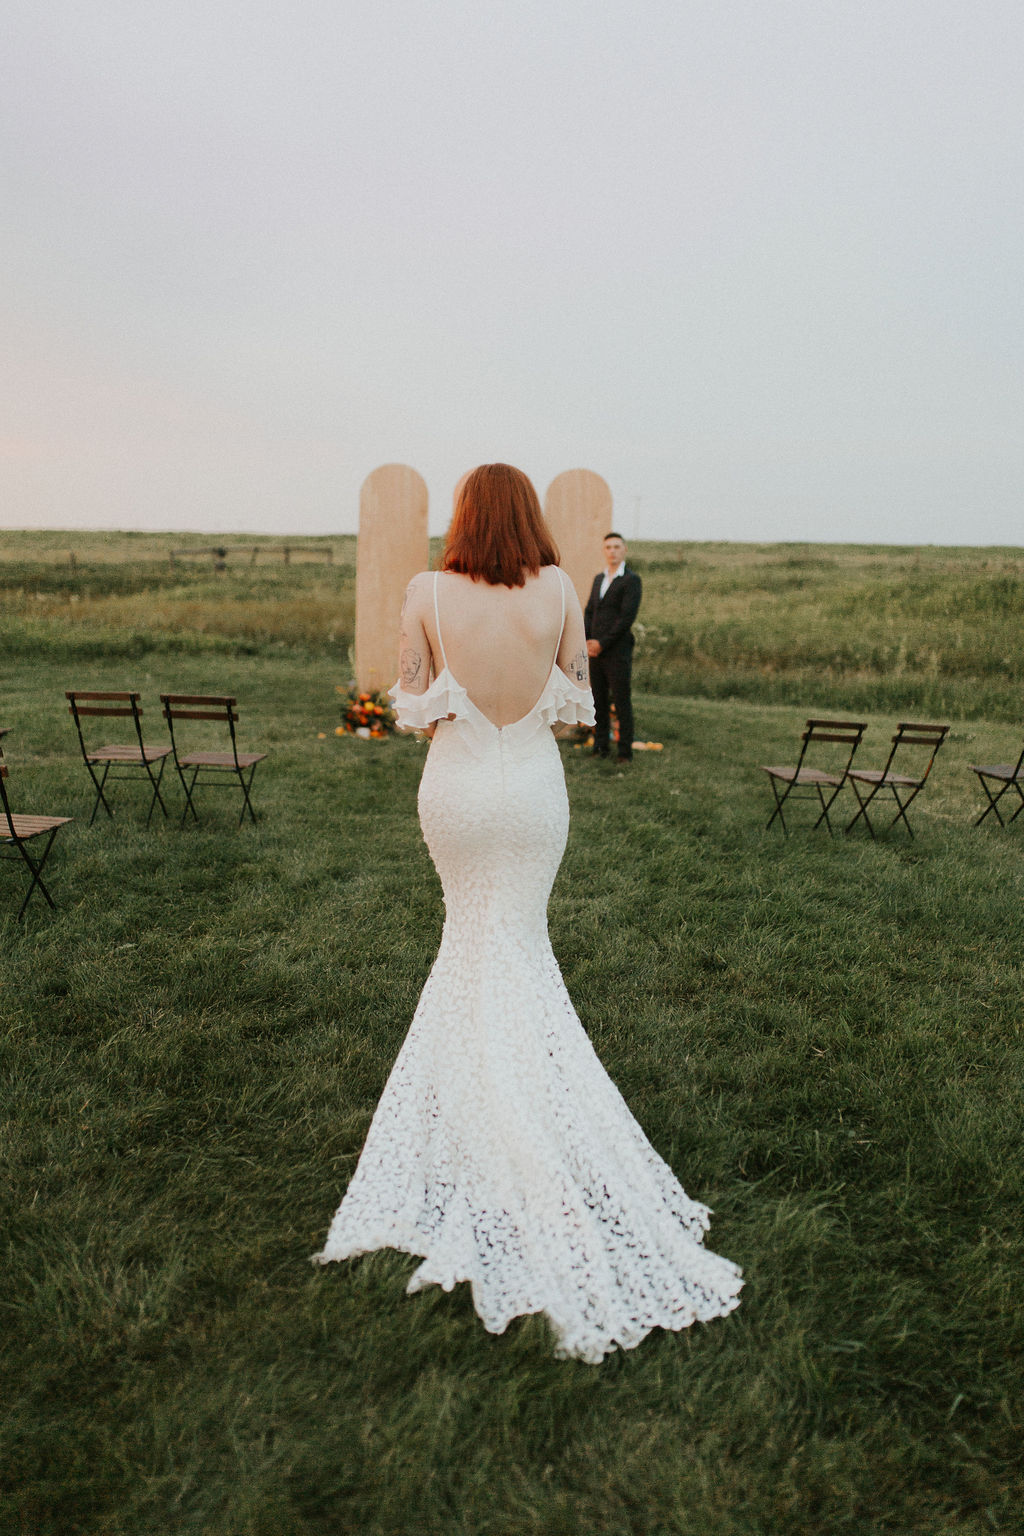 Bride walks down the aisle in a dreamy backless wedding dress with ruffled sleeves from Lovenote Bride